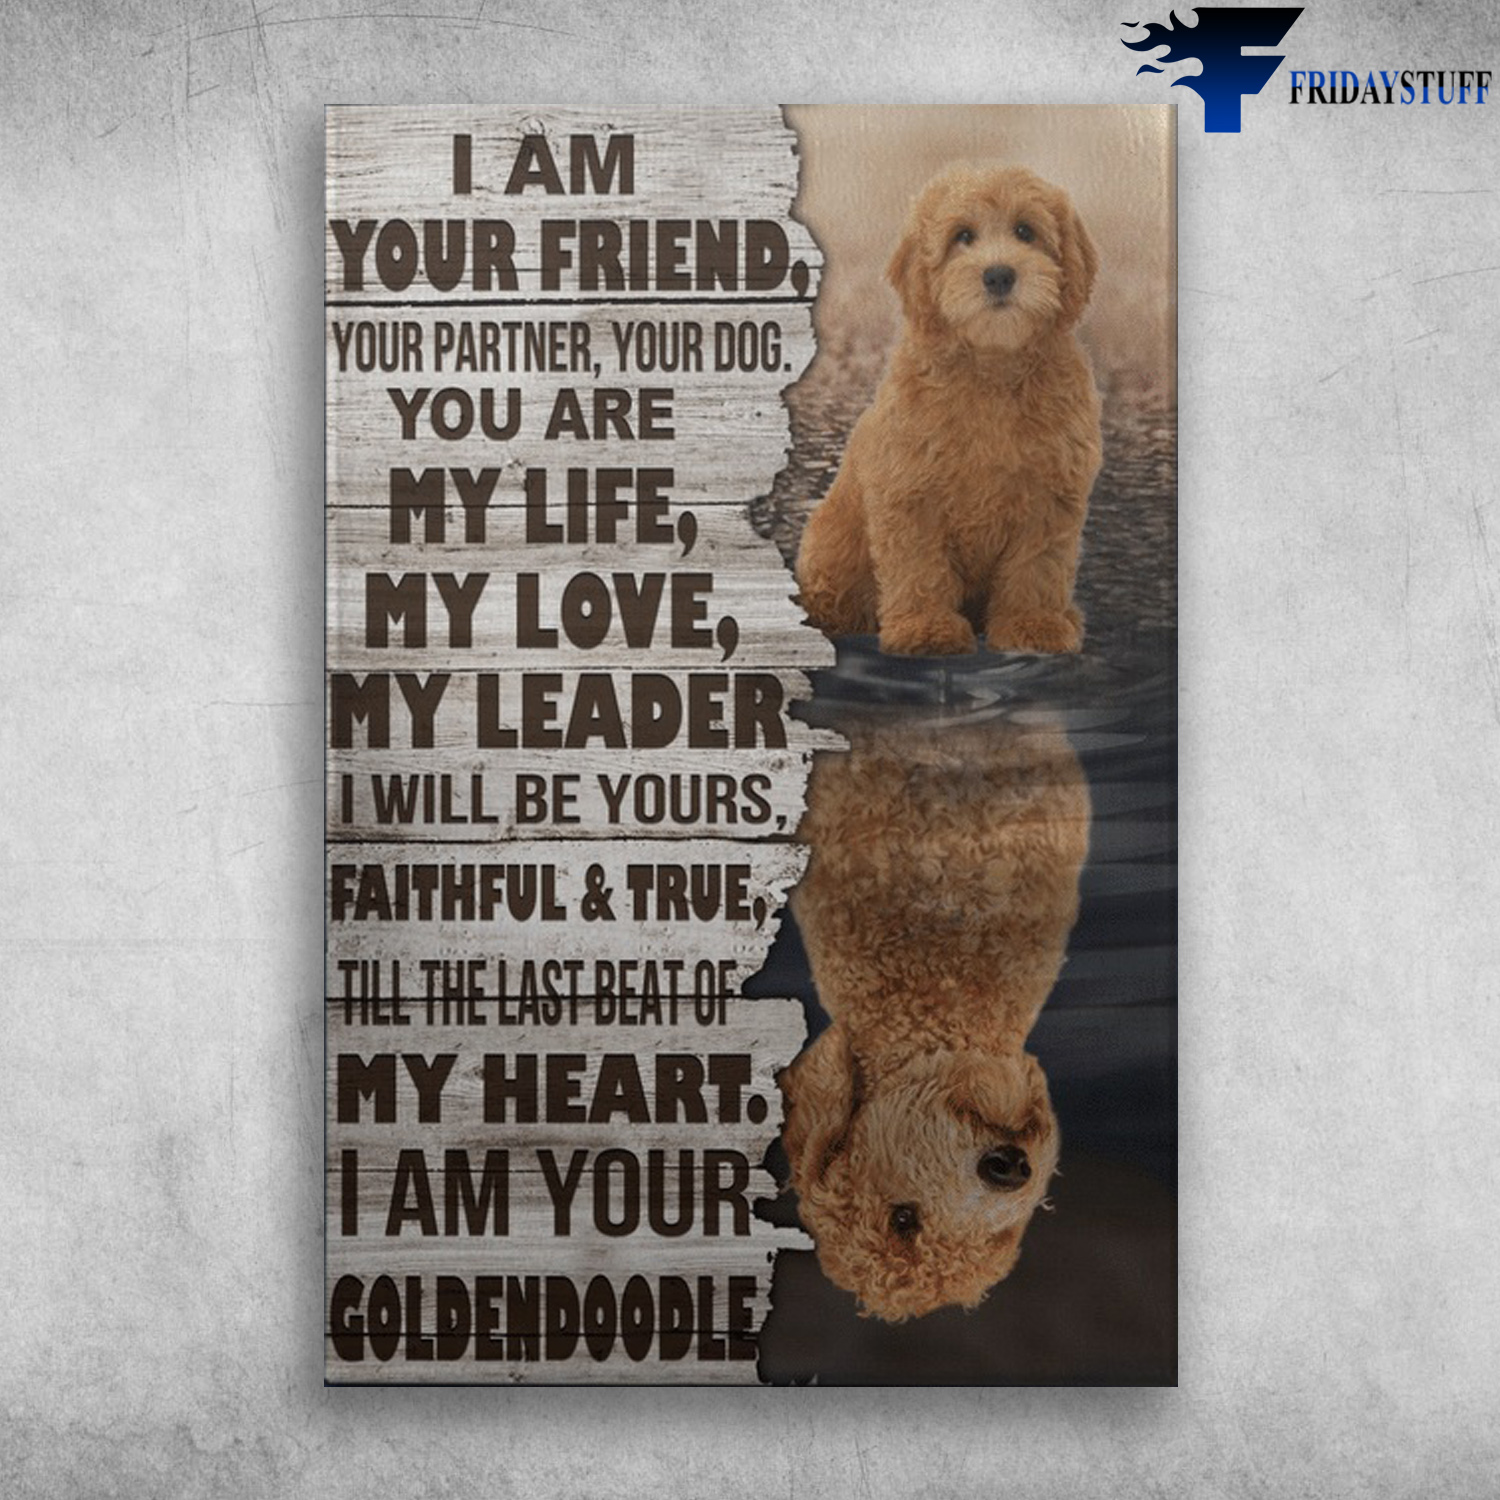 Goldendoodle Dog - I Am Your Friend, Your Partner, Your Dog, You Are My Life, My Love, My Leader, I Will Be Yours Faithfull And True, Till The Last Beat Of My Heart, I Am Your Goldendoodle